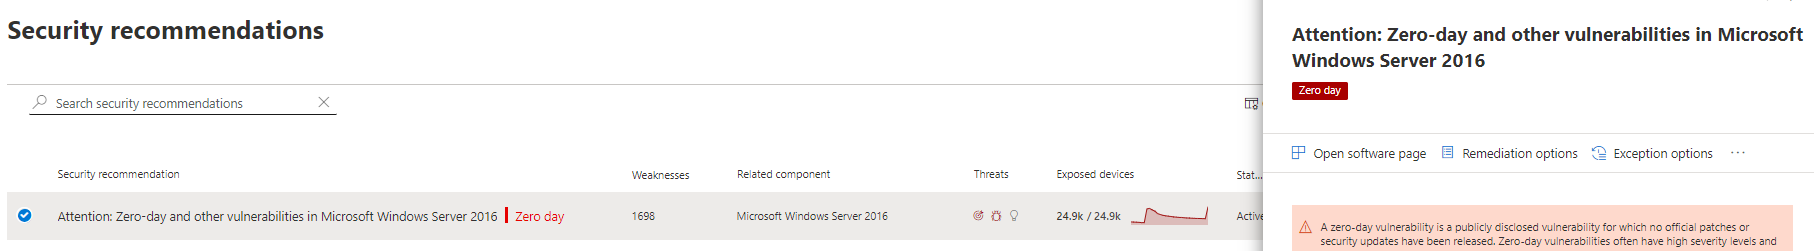 Zero day example of Windows Server 2016 in the security recommendations page.